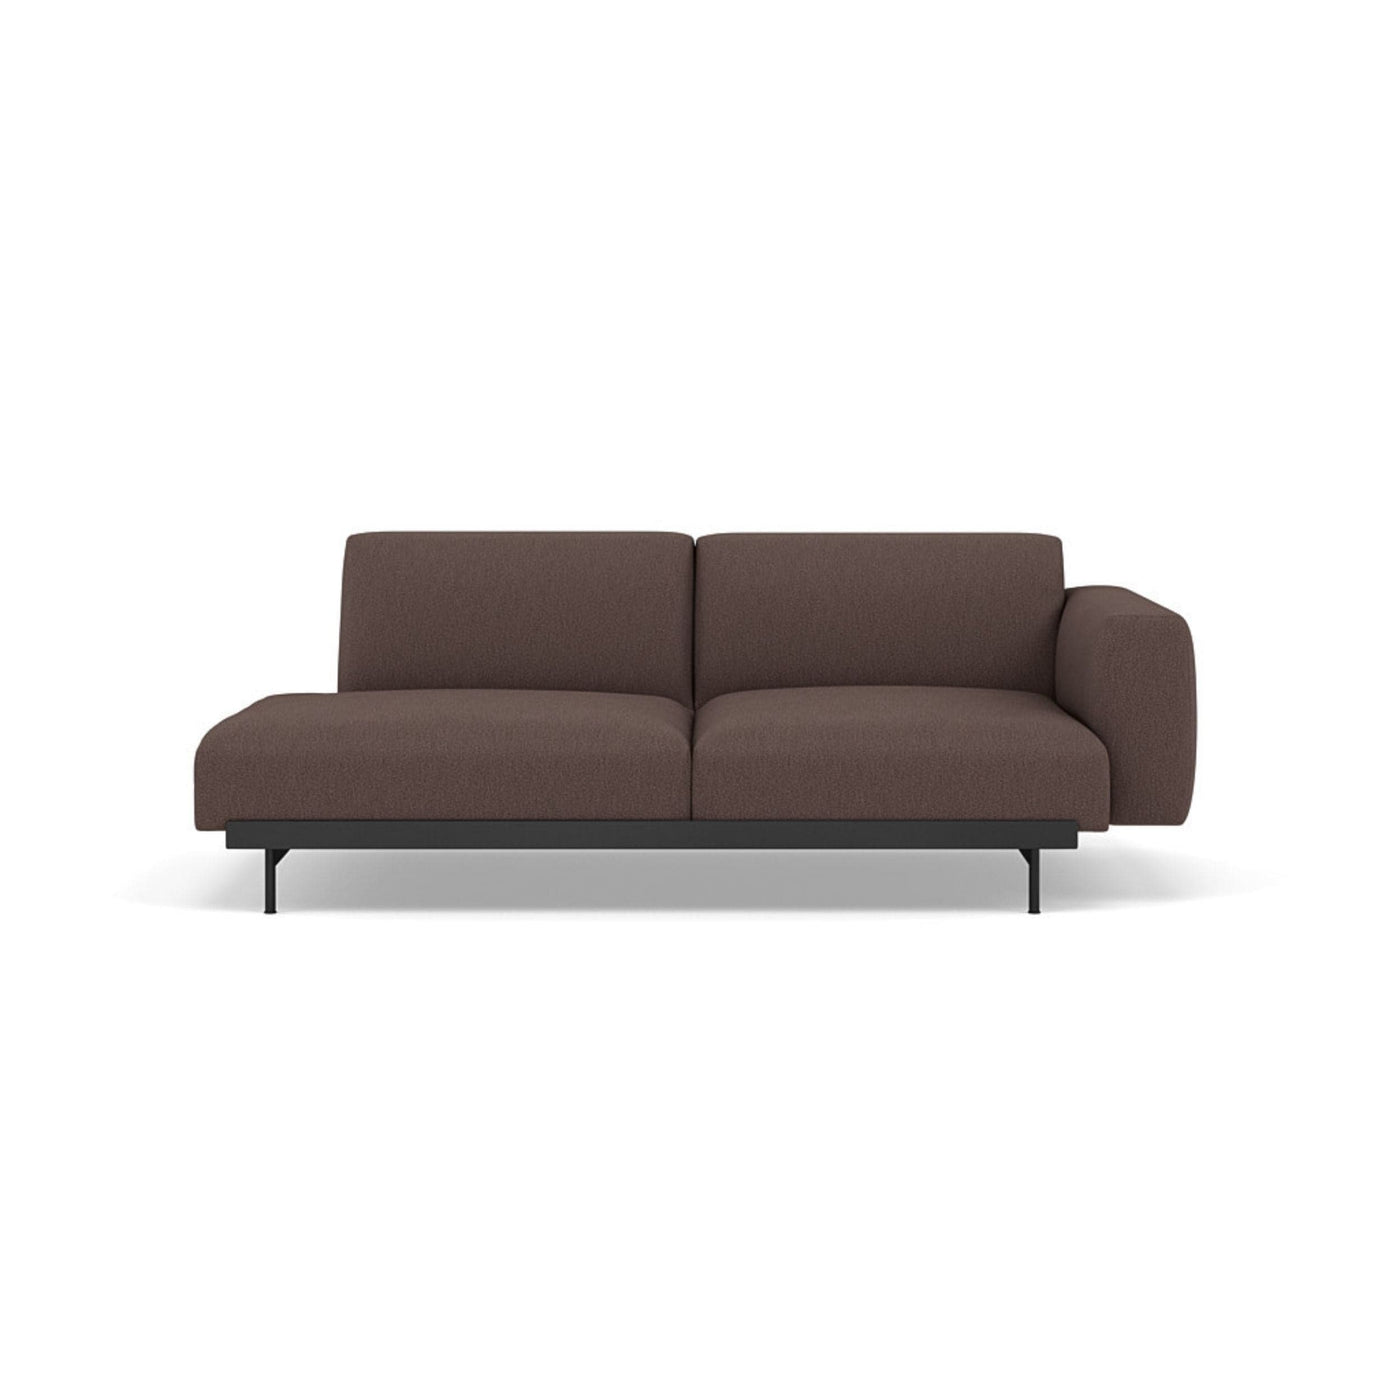 Muuto In Situ Modular 2 Seater Sofa, configuration 2 in clay 6 fabric. Made to order from someday designs #colour_clay-6-red-brown